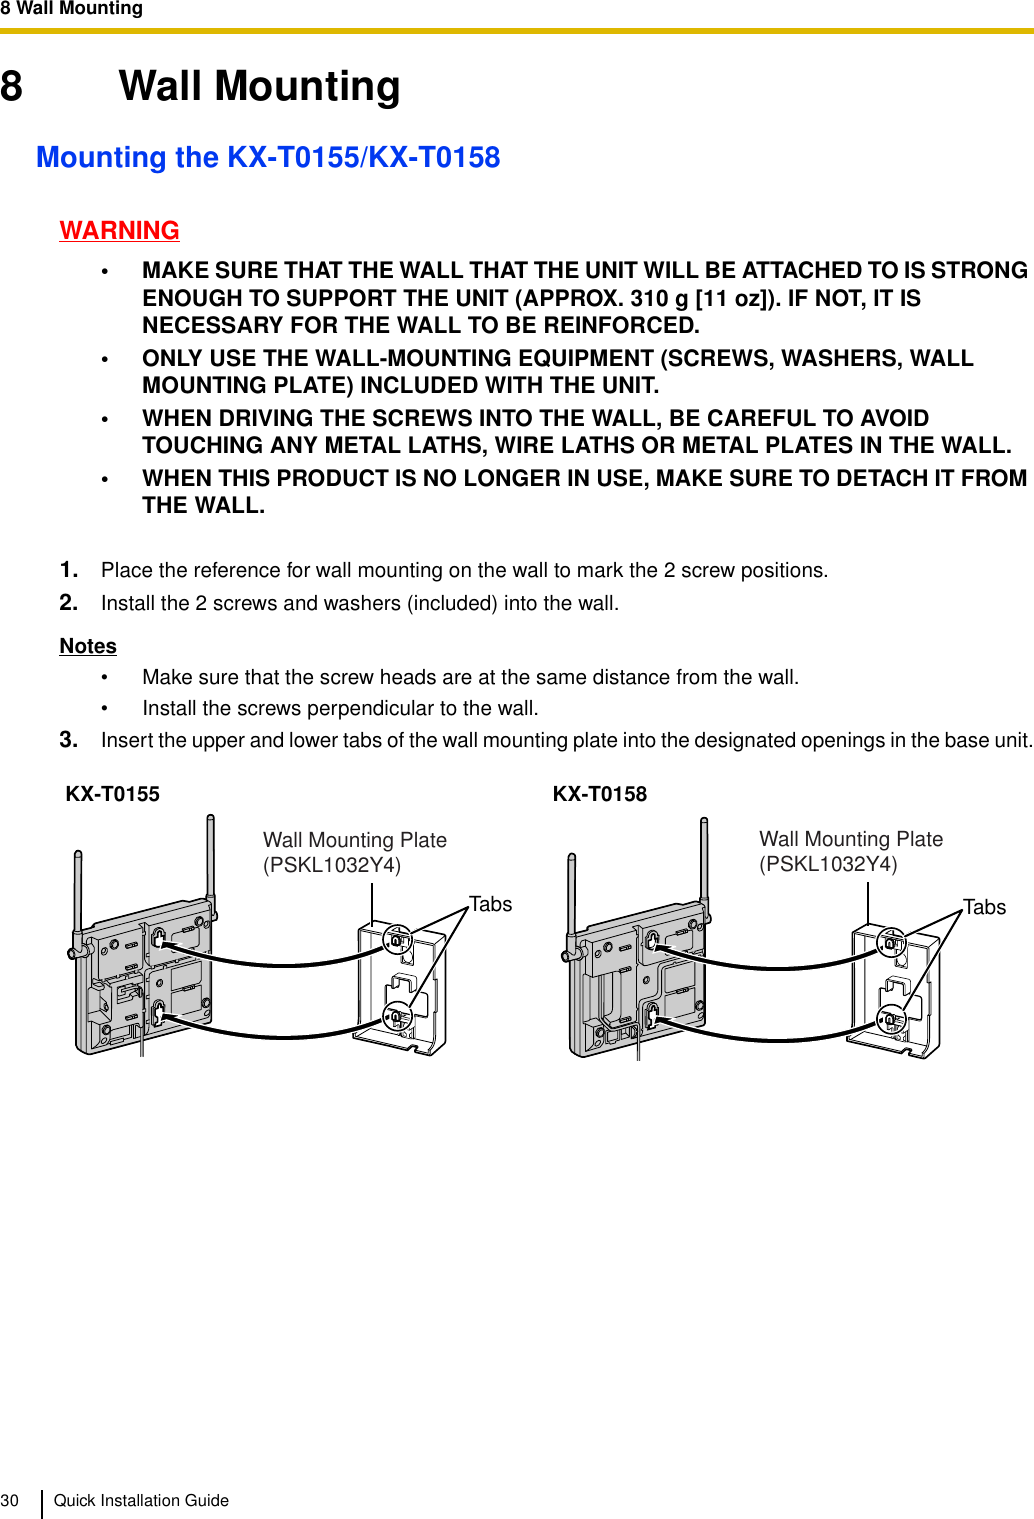 8 Wall Mounting30 Quick Installation Guide8 Wall MountingMounting the KX-T0155/KX-T0158WARNING• MAKE SURE THAT THE WALL THAT THE UNIT WILL BE ATTACHED TO IS STRONG ENOUGH TO SUPPORT THE UNIT (APPROX. 310 g [11 oz]). IF NOT, IT IS NECESSARY FOR THE WALL TO BE REINFORCED.• ONLY USE THE WALL-MOUNTING EQUIPMENT (SCREWS, WASHERS, WALL MOUNTING PLATE) INCLUDED WITH THE UNIT.• WHEN DRIVING THE SCREWS INTO THE WALL, BE CAREFUL TO AVOID TOUCHING ANY METAL LATHS, WIRE LATHS OR METAL PLATES IN THE WALL.• WHEN THIS PRODUCT IS NO LONGER IN USE, MAKE SURE TO DETACH IT FROM THE WALL.1. Place the reference for wall mounting on the wall to mark the 2 screw positions.2. Install the 2 screws and washers (included) into the wall.Notes• Make sure that the screw heads are at the same distance from the wall.• Install the screws perpendicular to the wall.3. Insert the upper and lower tabs of the wall mounting plate into the designated openings in the base unit.KX-T0155 KX-T0158TabsWall Mounting Plate (PSKL1032Y4)TabsWall Mounting Plate (PSKL1032Y4)